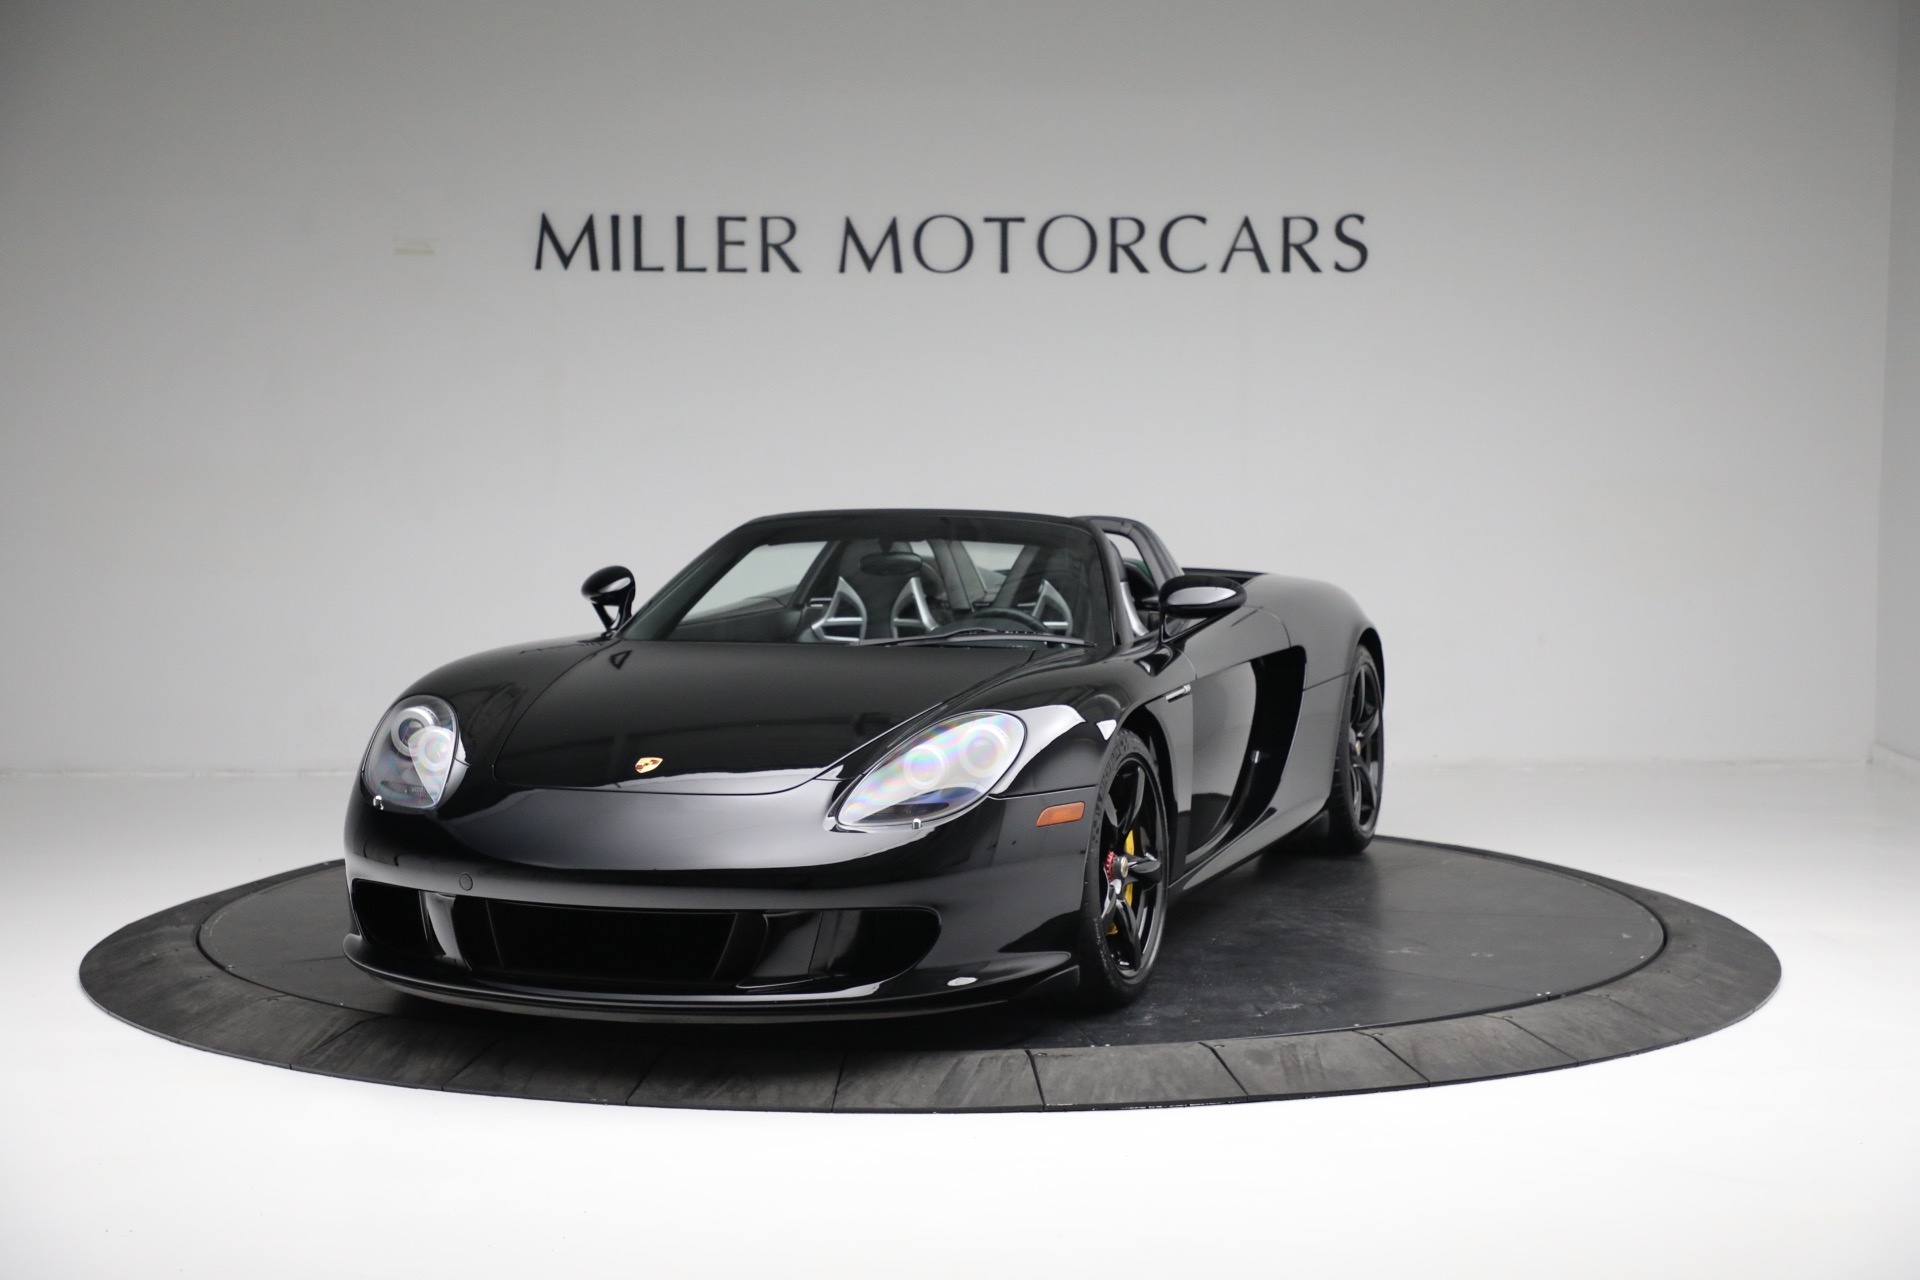 Used 2005 Porsche Carrera GT for sale $1,400,000 at Bentley Greenwich in Greenwich CT 06830 1